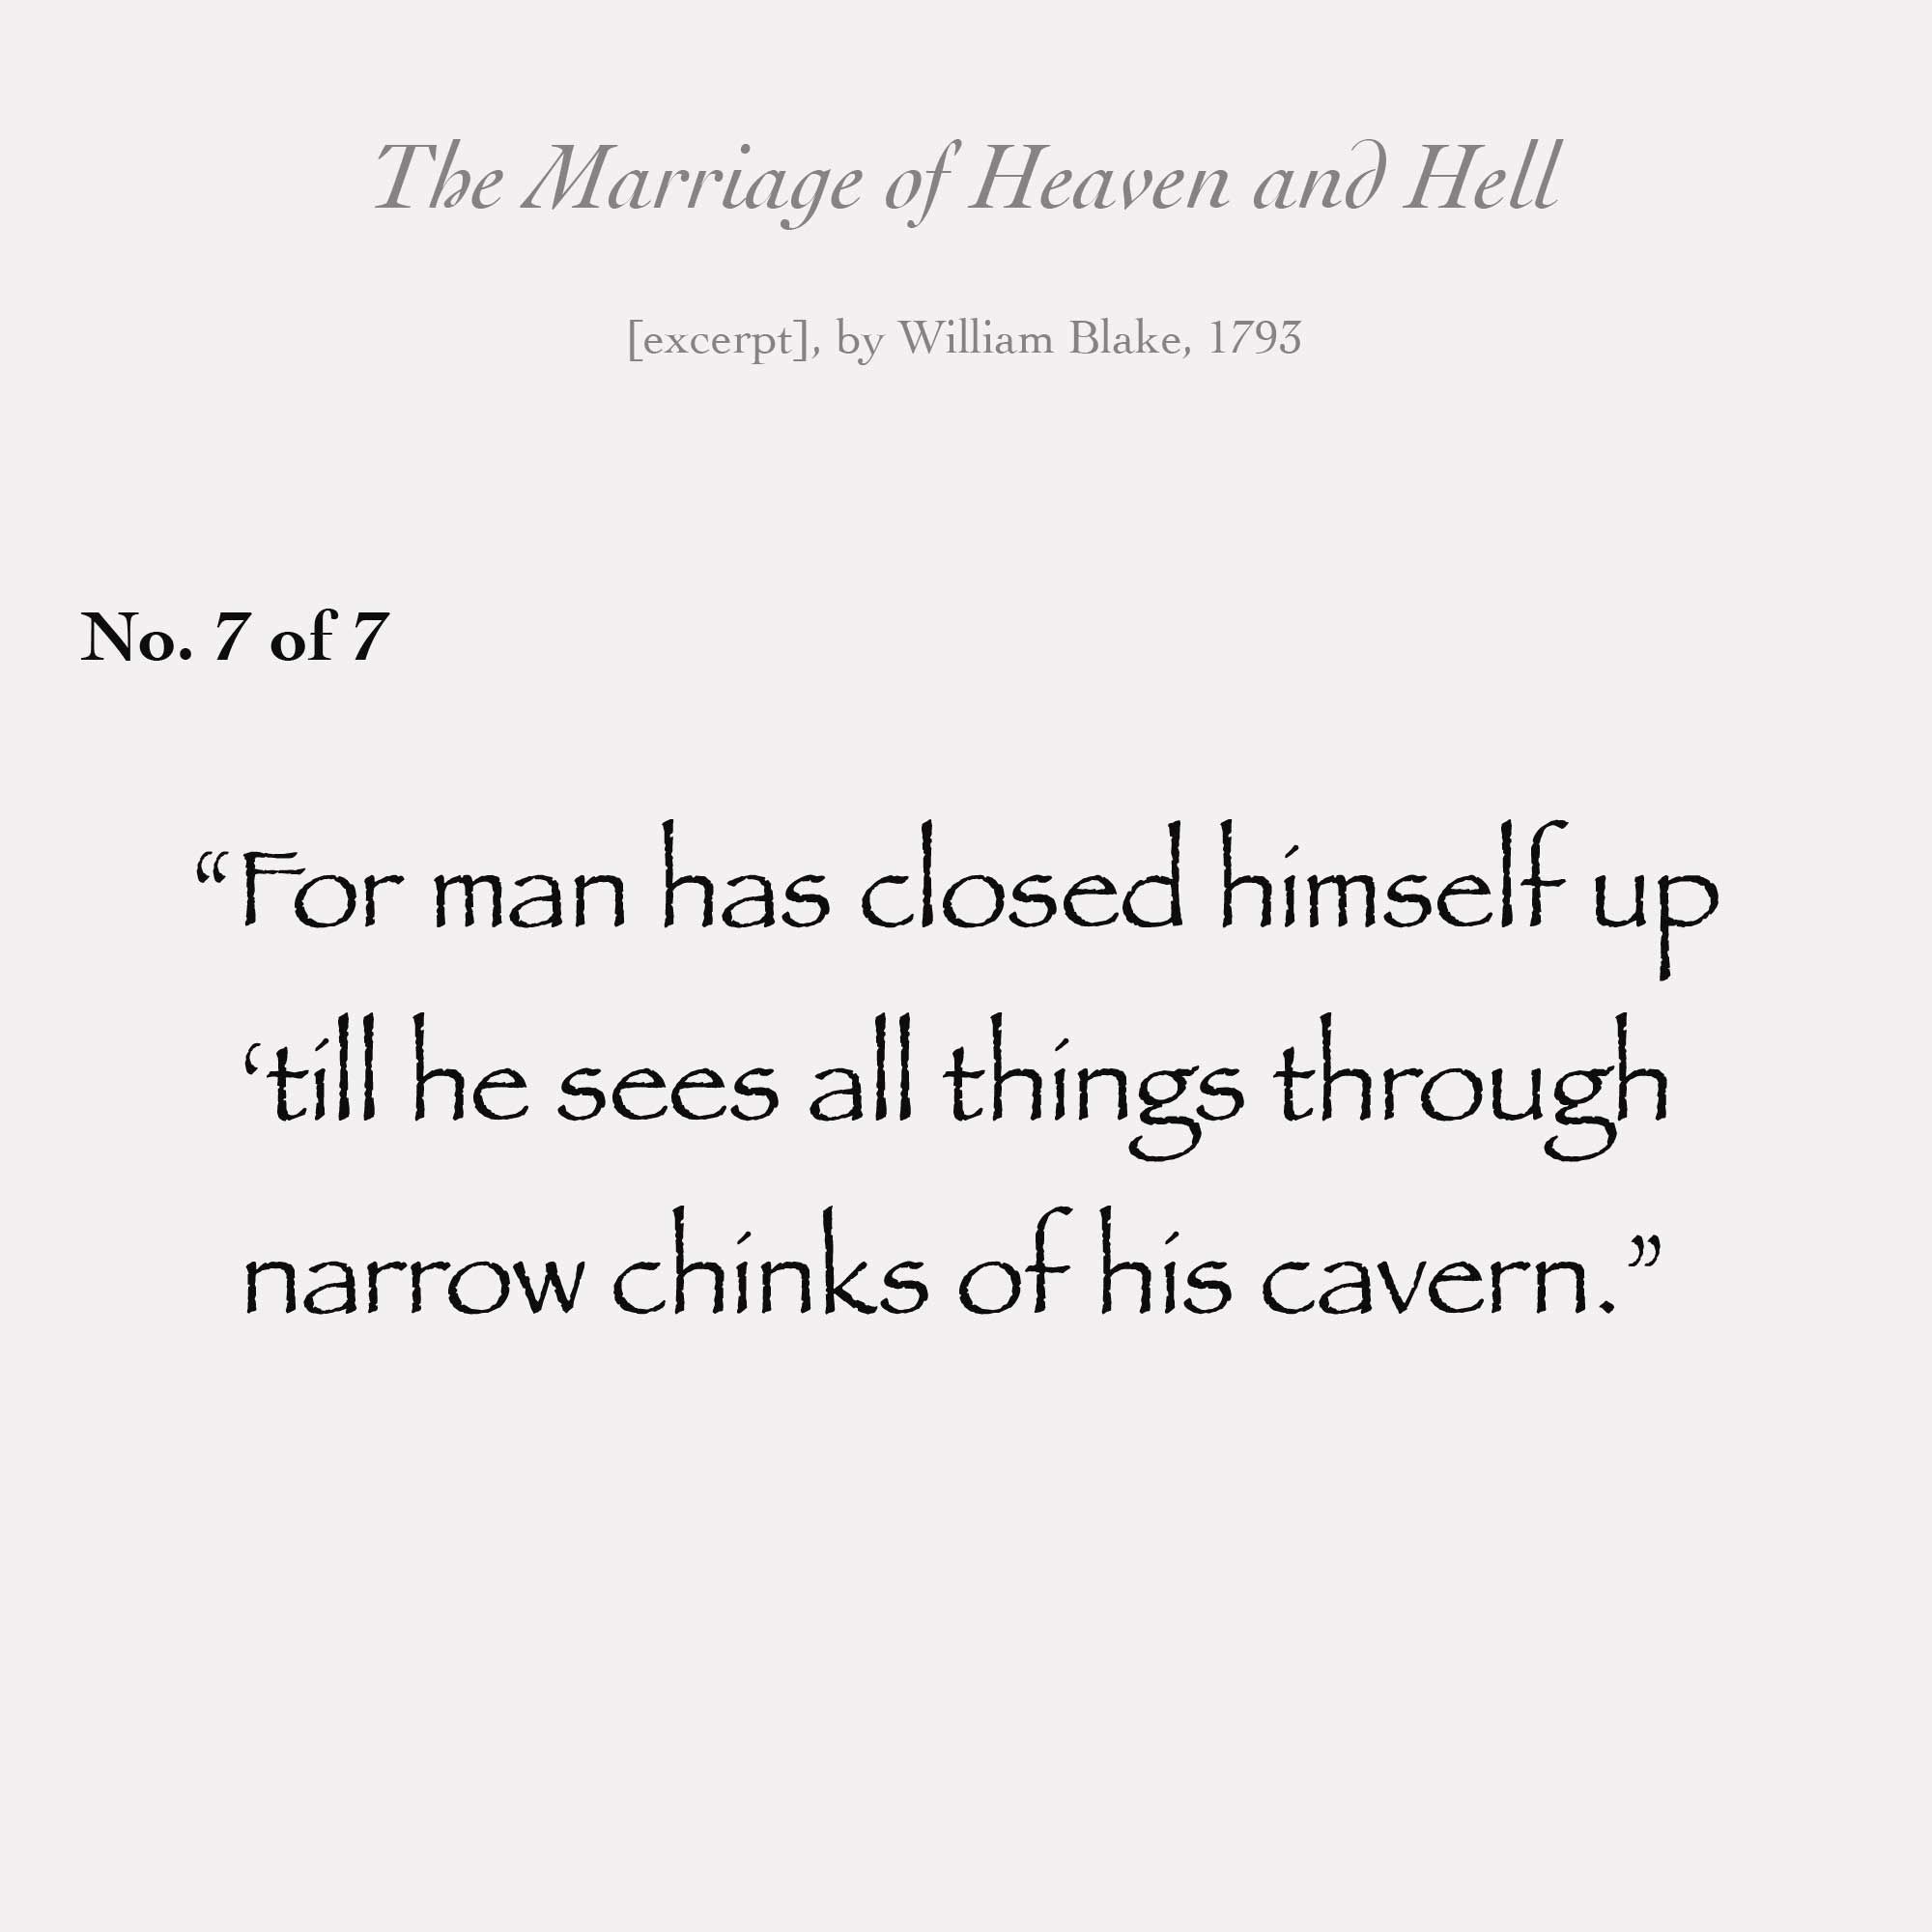 "For man has closed himself up till he sees all things through narrow chinks of his cavern."